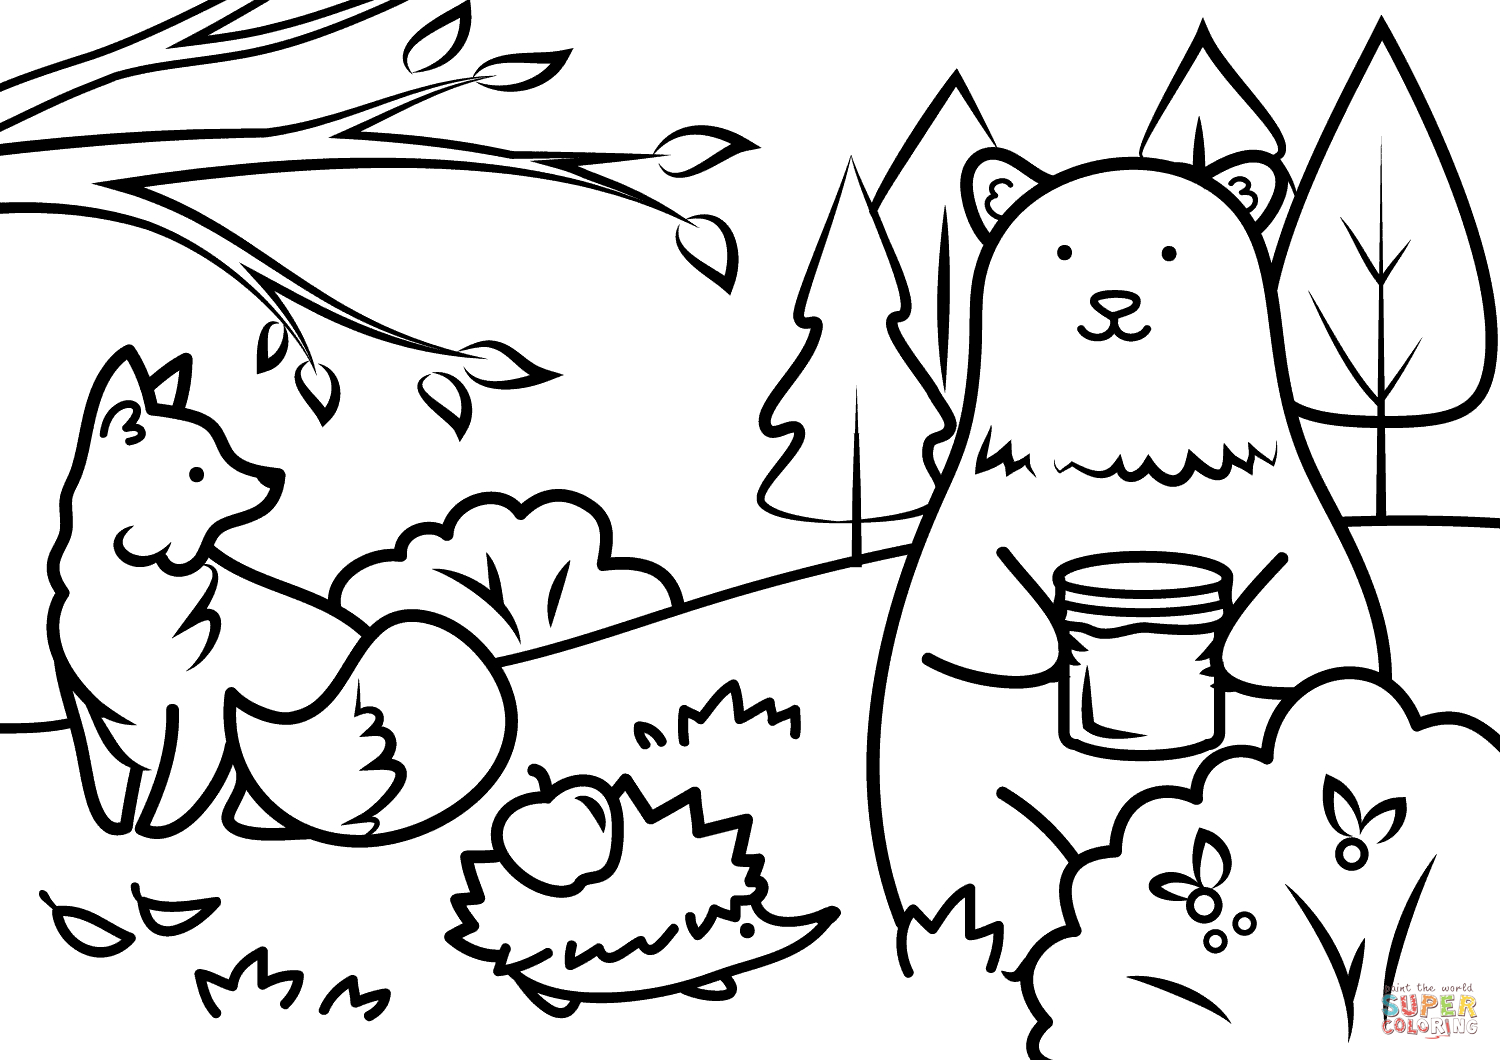 Autumn Animals Coloring Page | Free Printable Coloring Pages - Free Printable Animal Coloring Pages